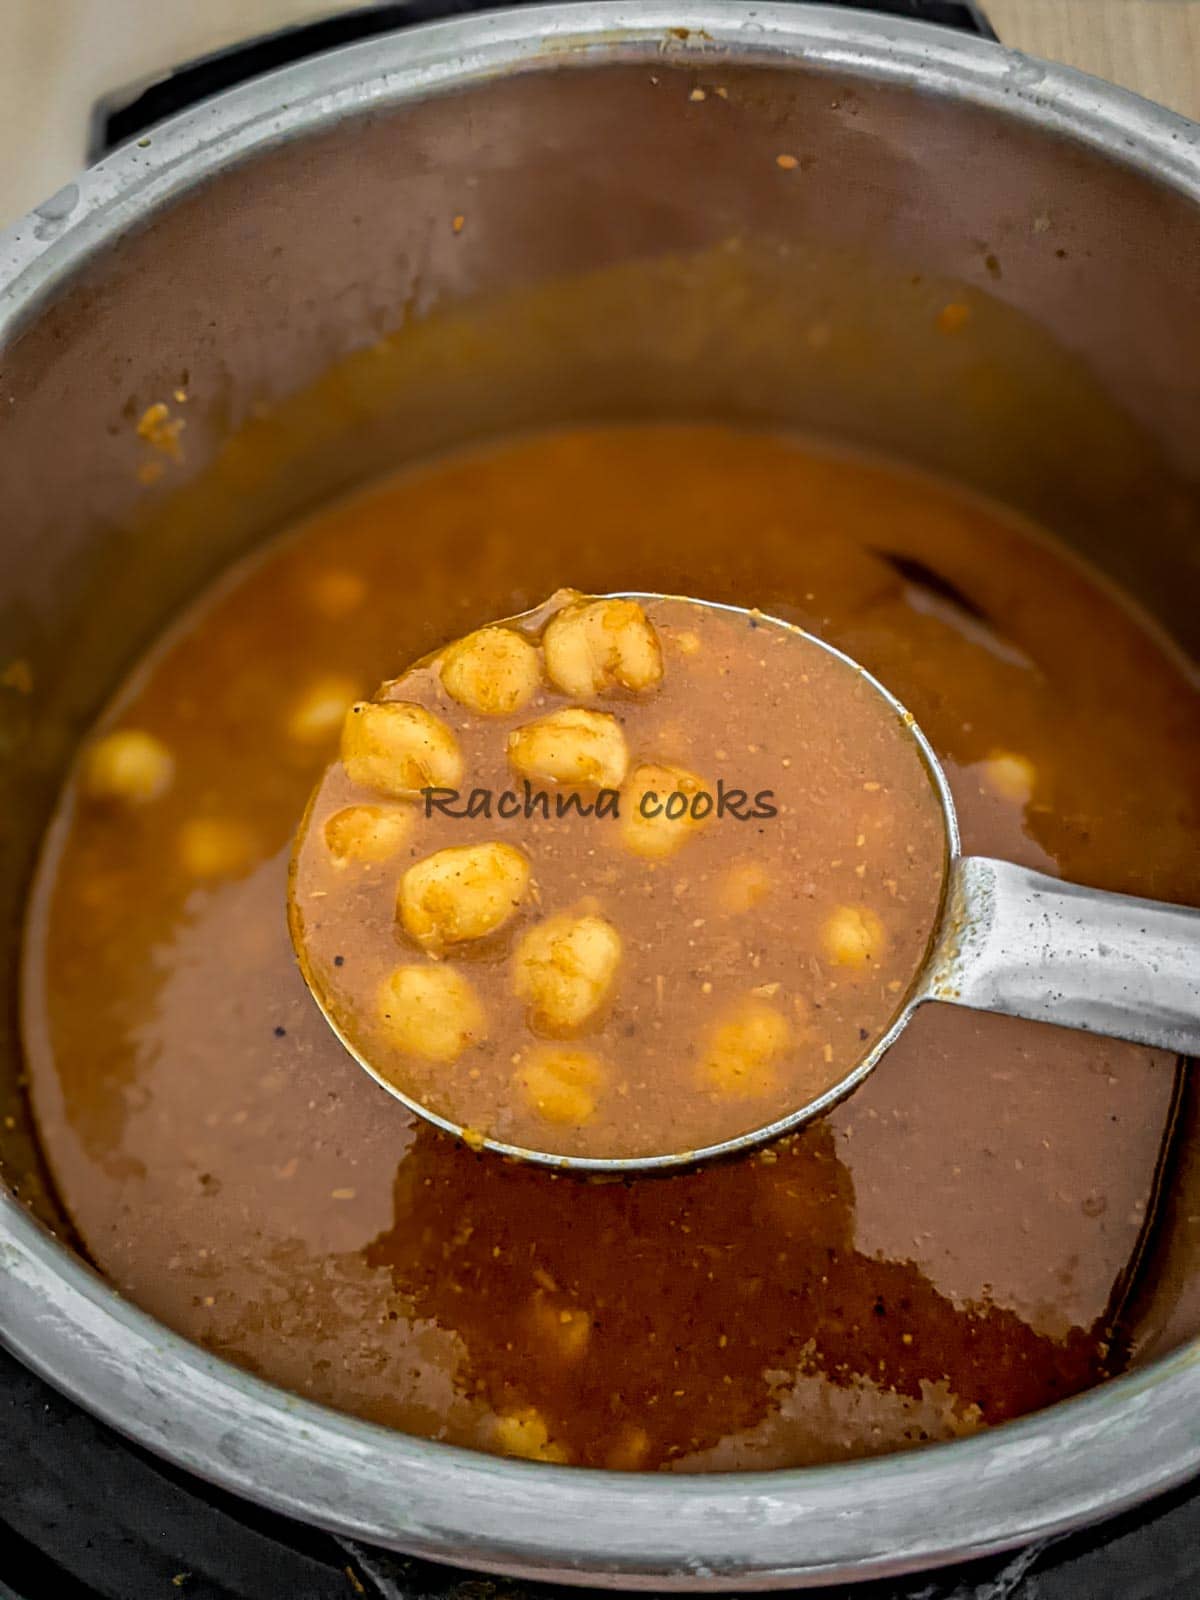 A ladle showing chana masala or chole curry on top of Instant pot.